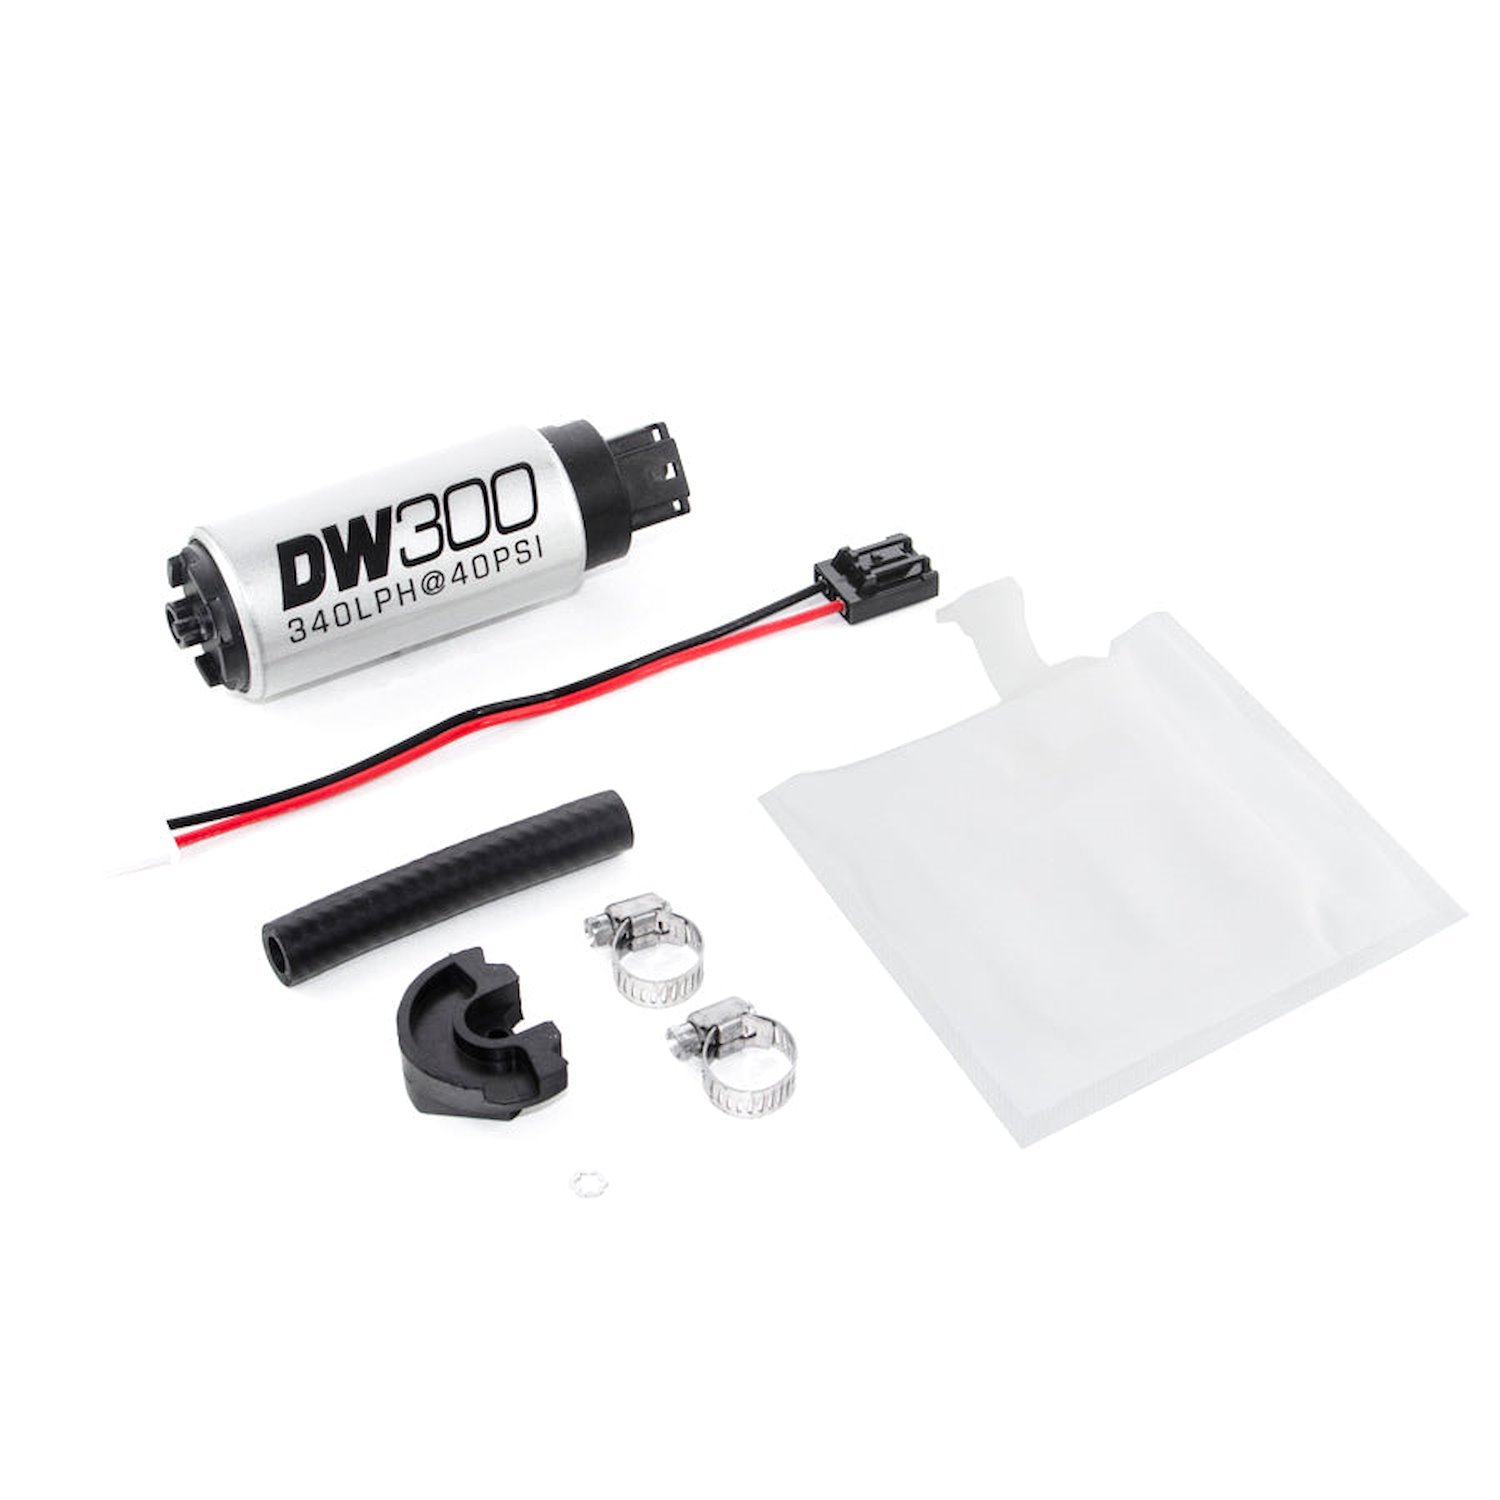 93010791 DW300 Series 340lph In-tank Fuel Pump w/ Install Kit for forester 97-07, Impreza93-07, Legacy GT 90-99 and 05-07